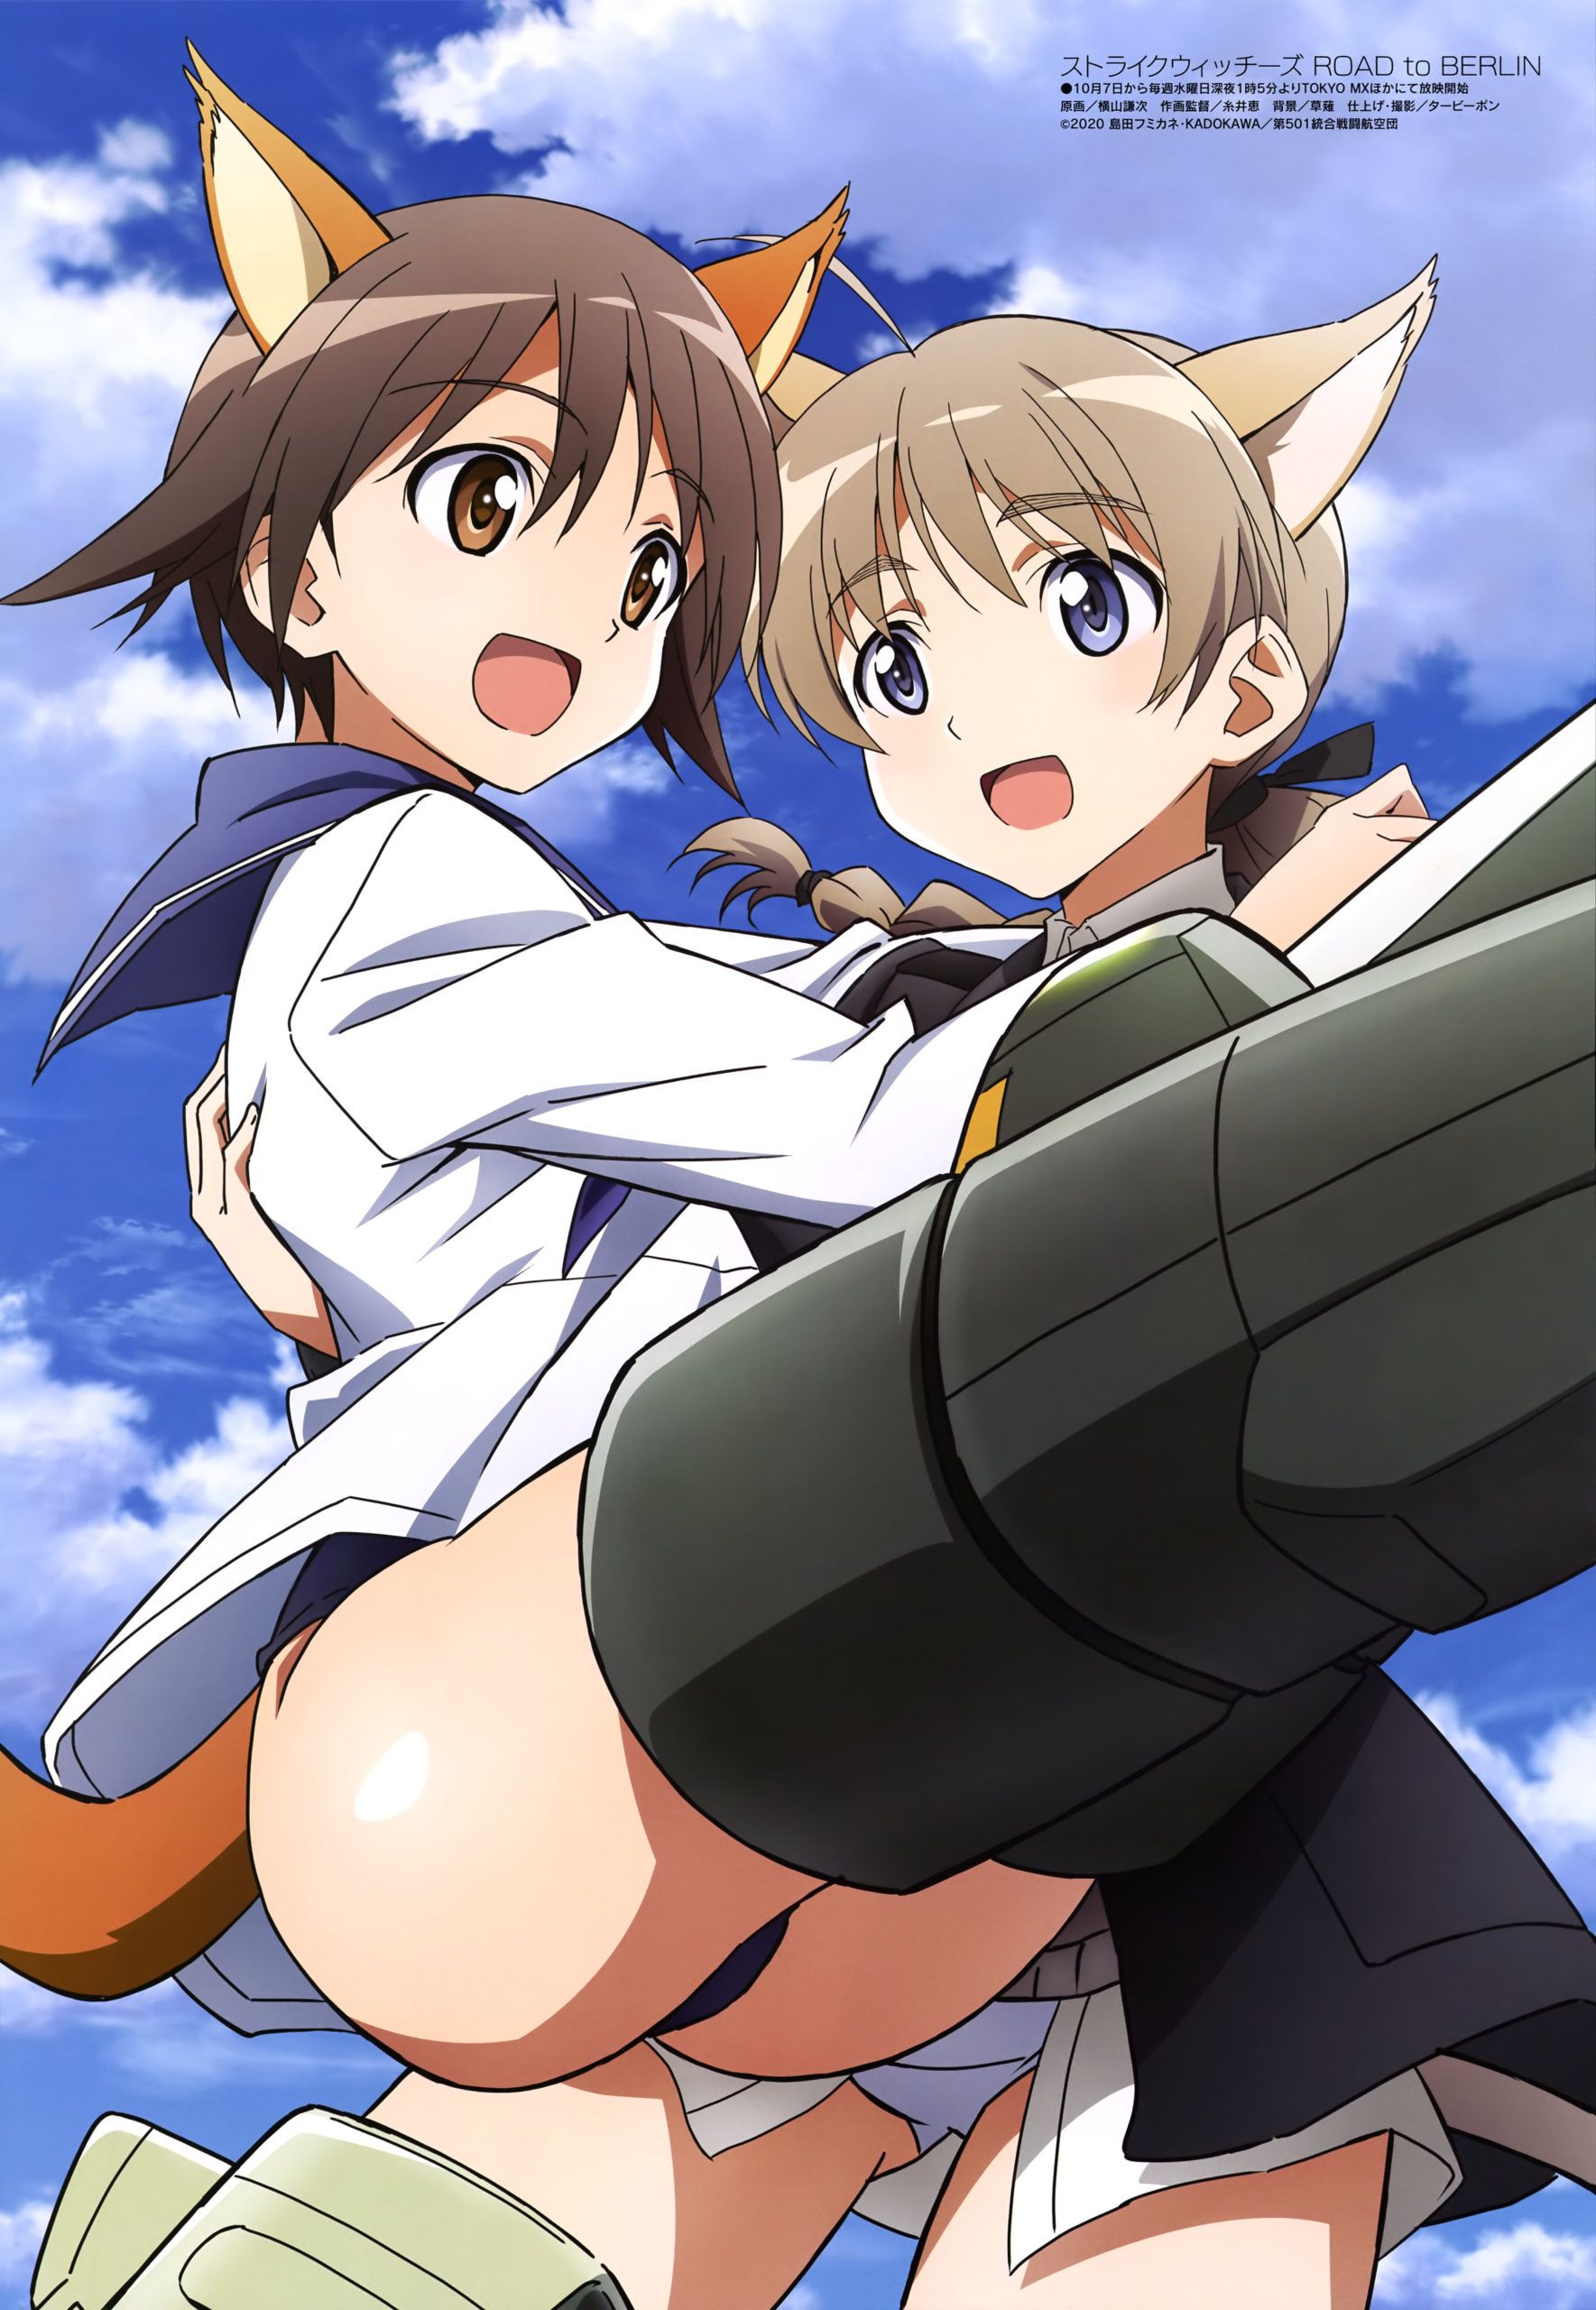 [Strike Witches] [Brave Witches] stripped Kora or erotic image Part 6 28